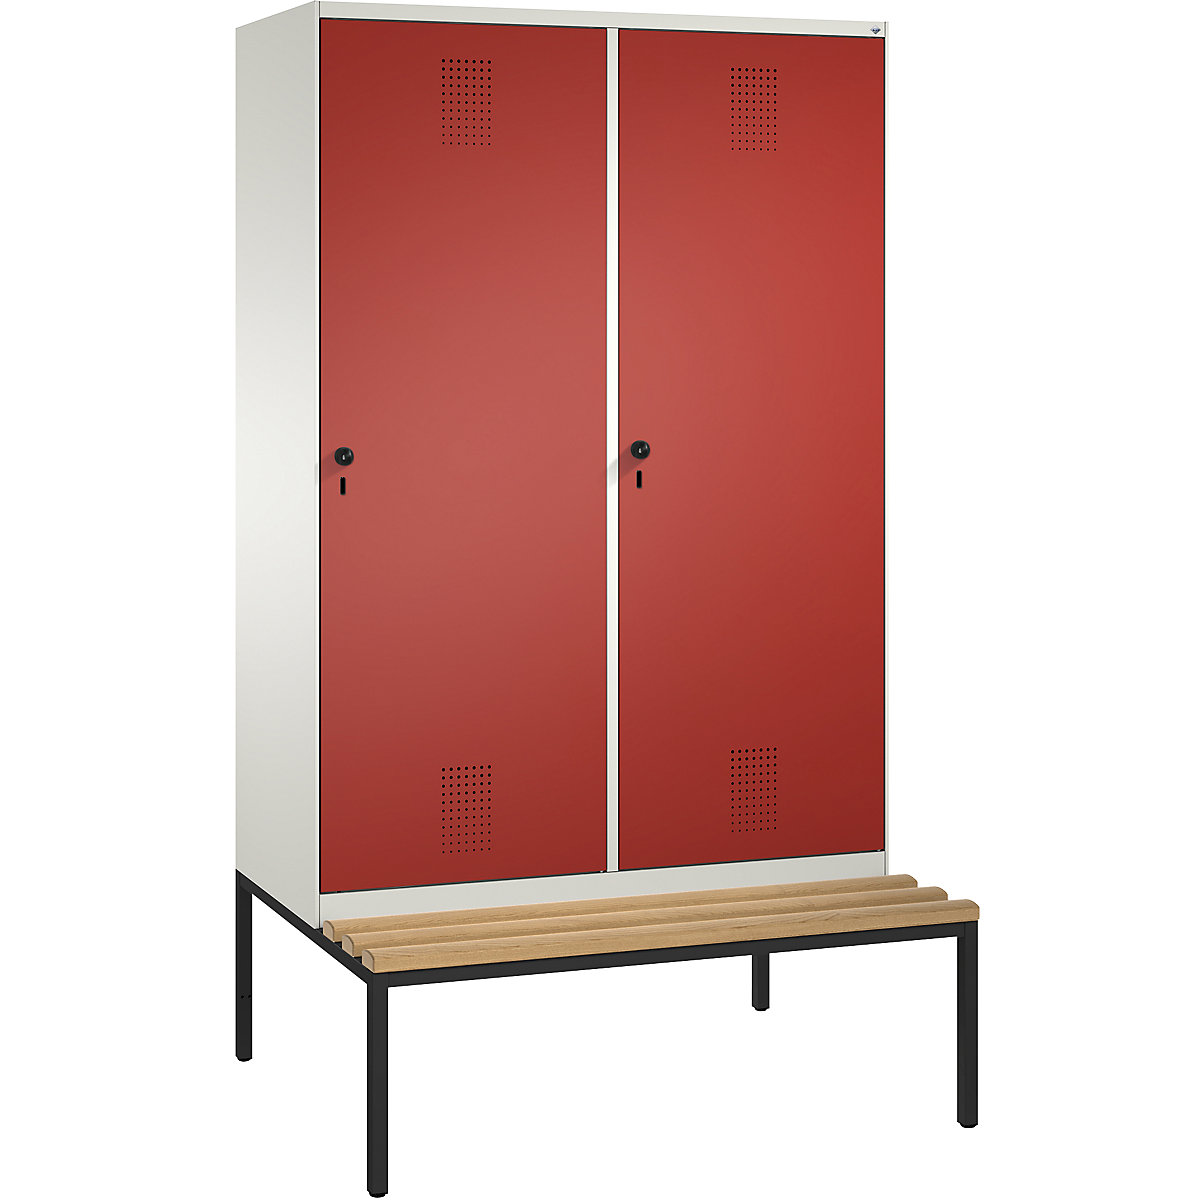 EVOLO cloakroom locker, with bench, door for 2 compartments – C+P, 4 compartments, 2 doors, compartment width 300 mm, pure white / flame red-6